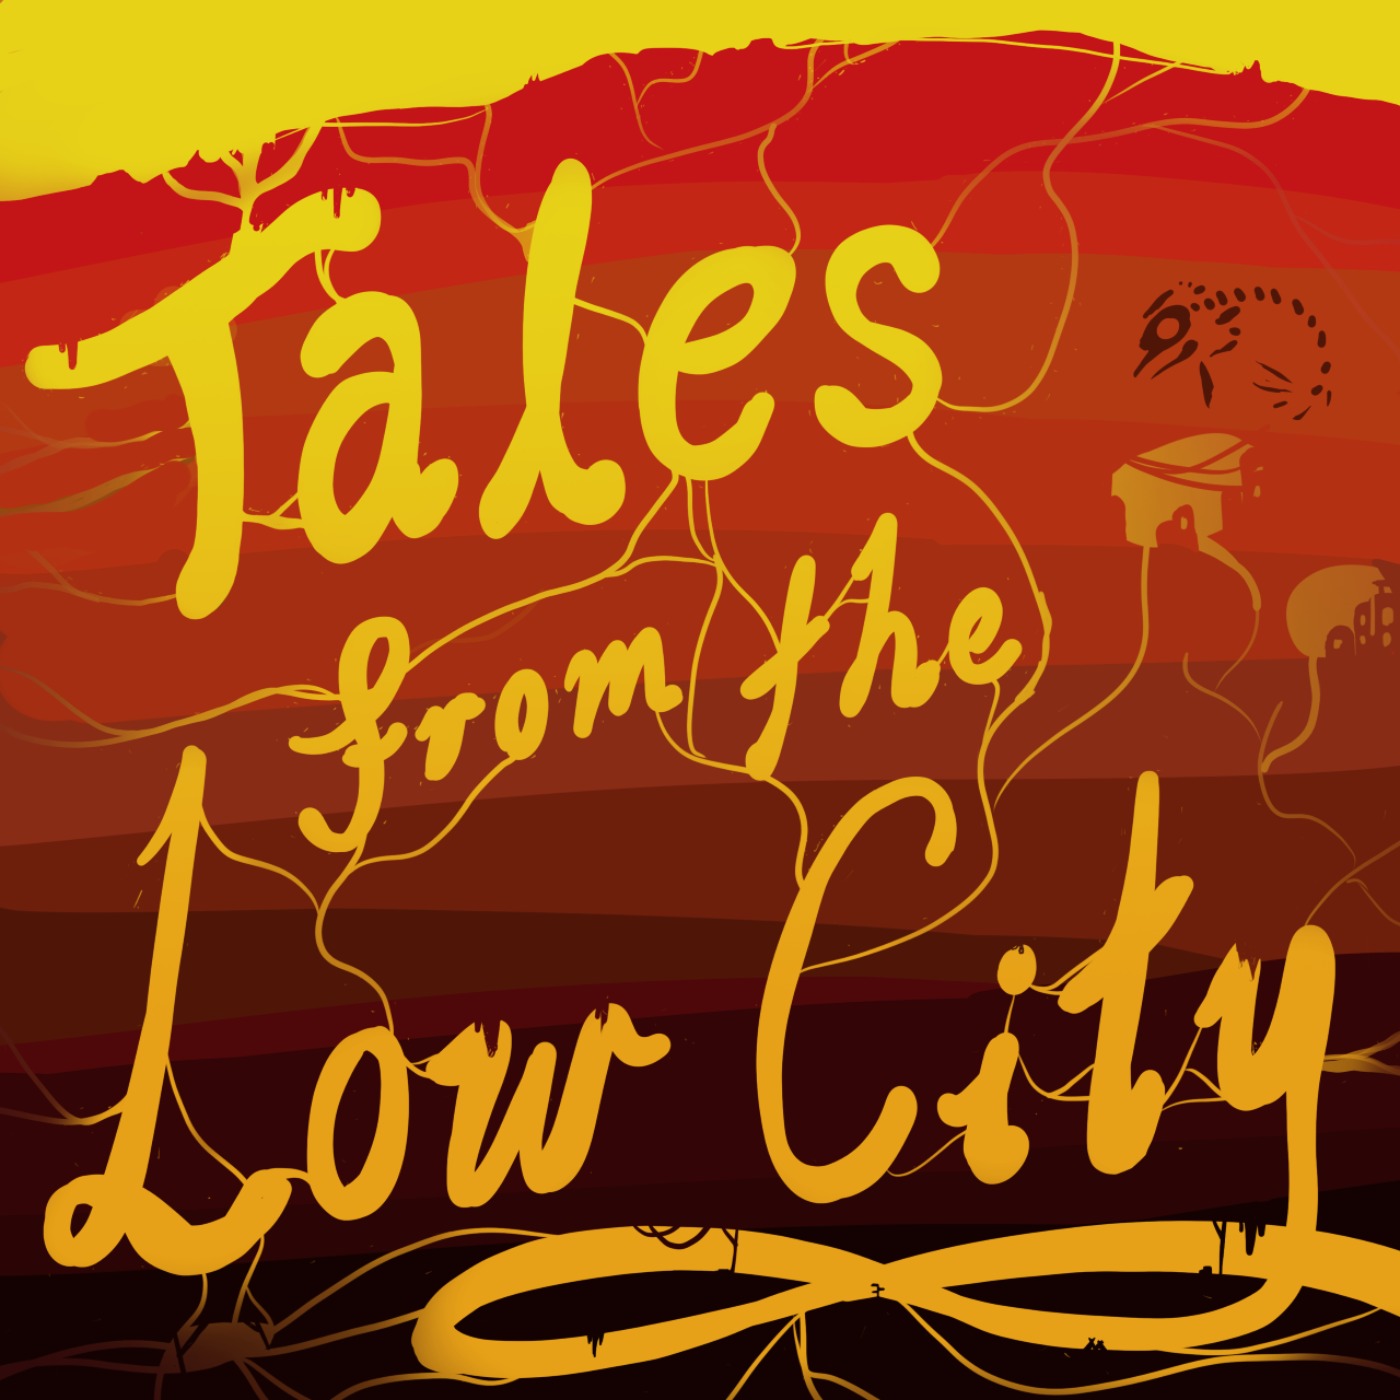 Tales from the Low City